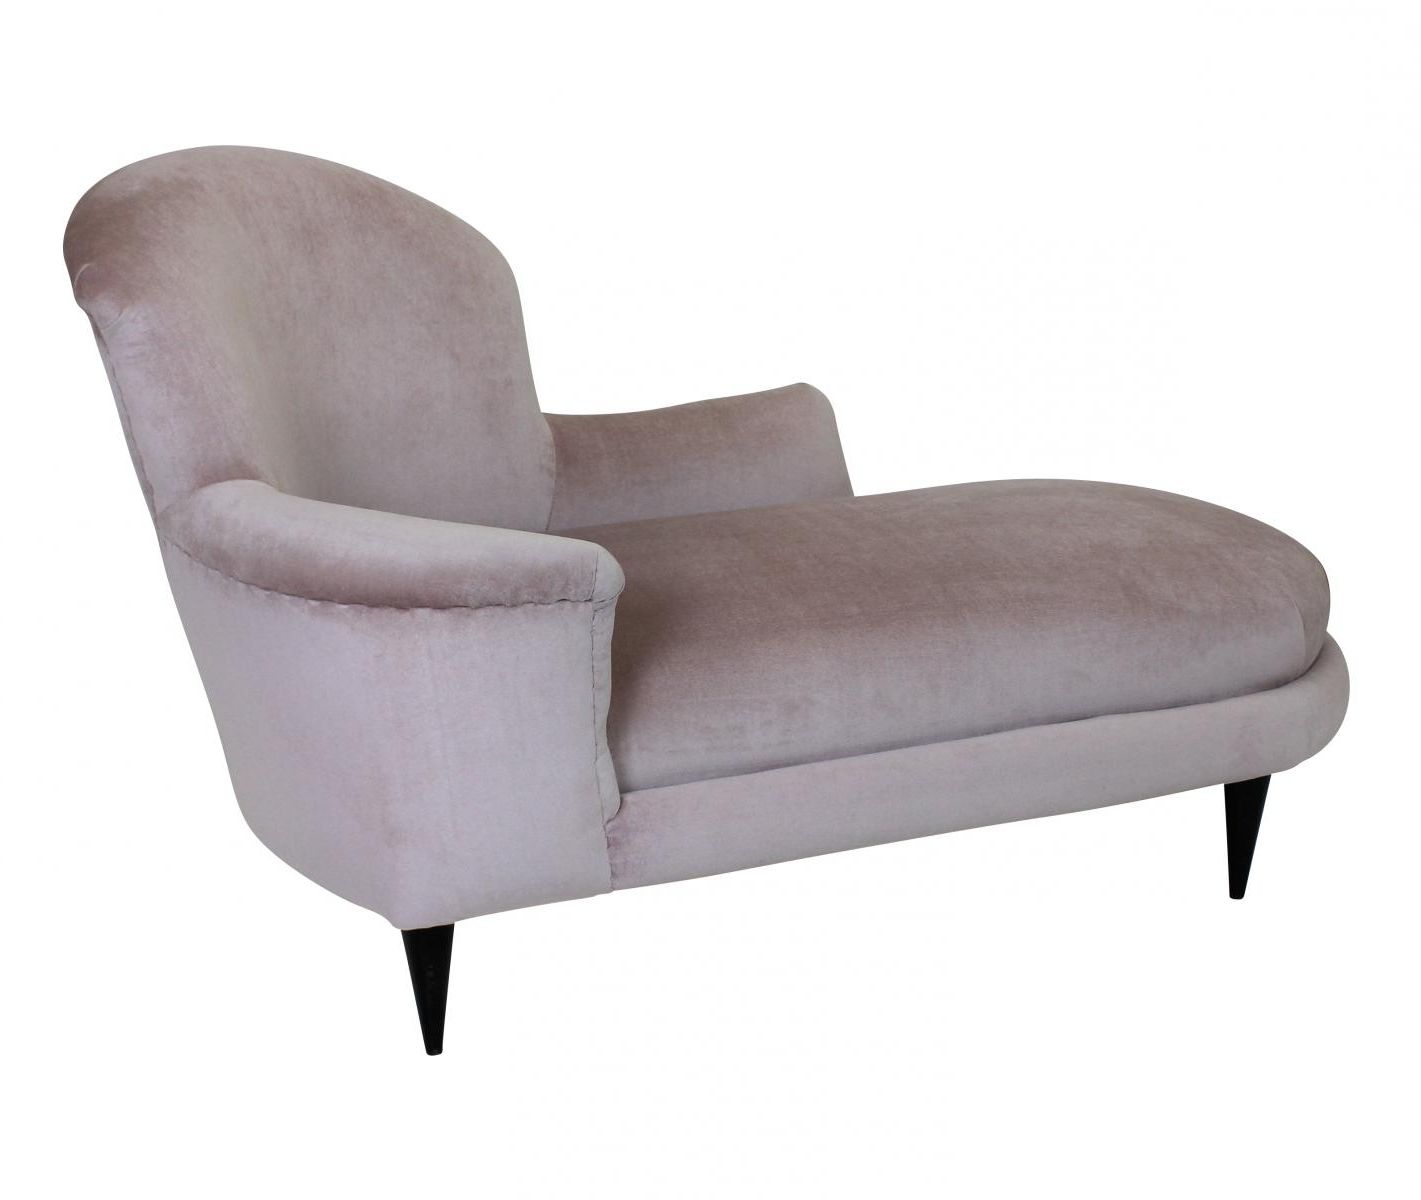 Widely Used Pink Chaise Lounge Sale (View 7 of 15)